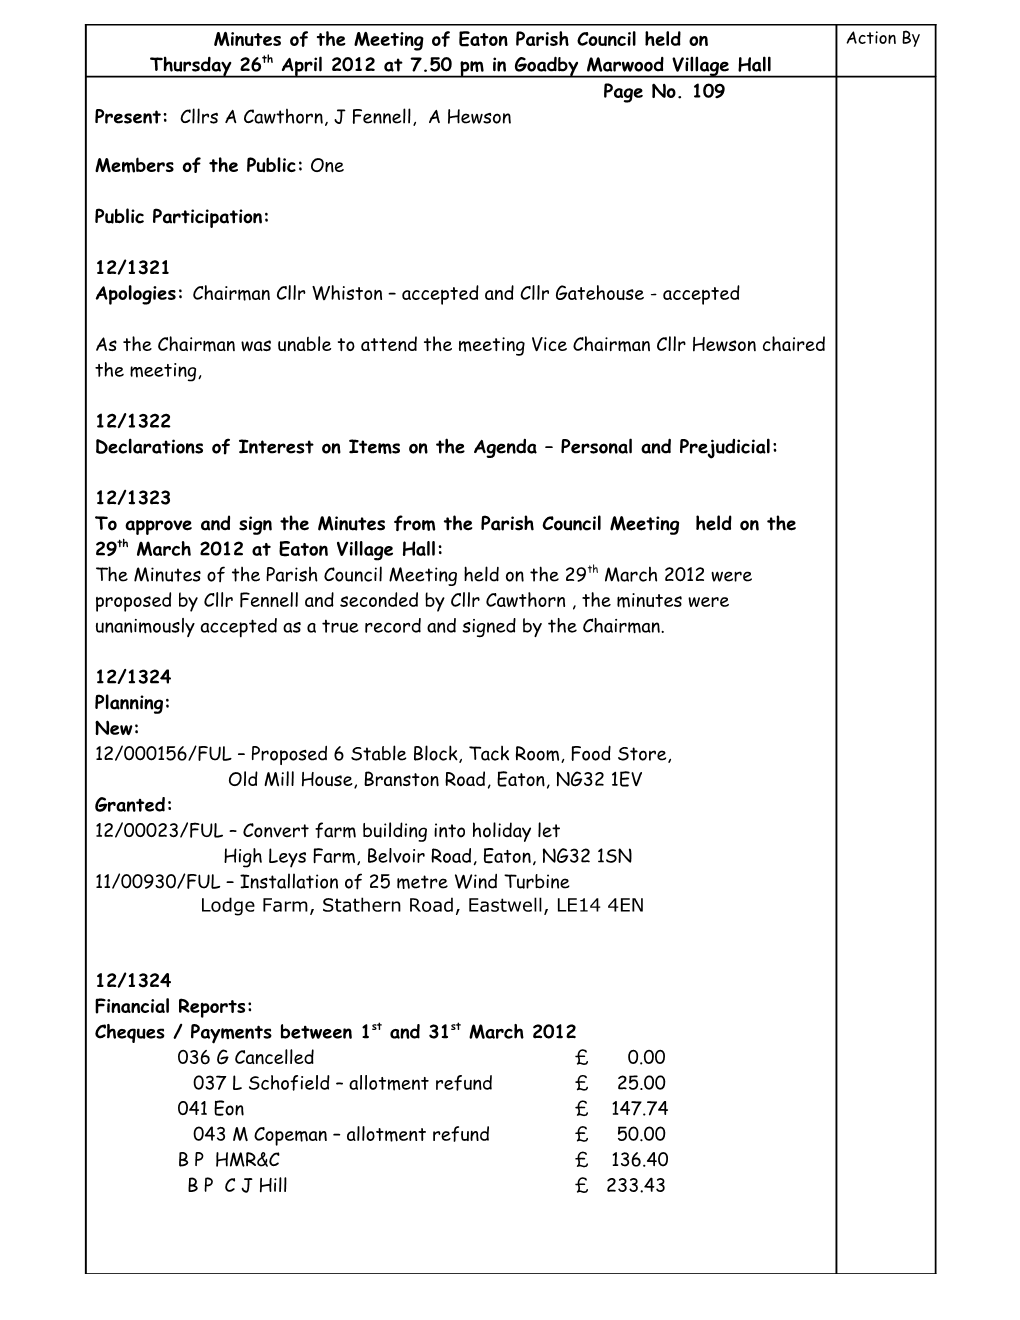 Minutes of the Meeting of Seagrave Parish Council On s1